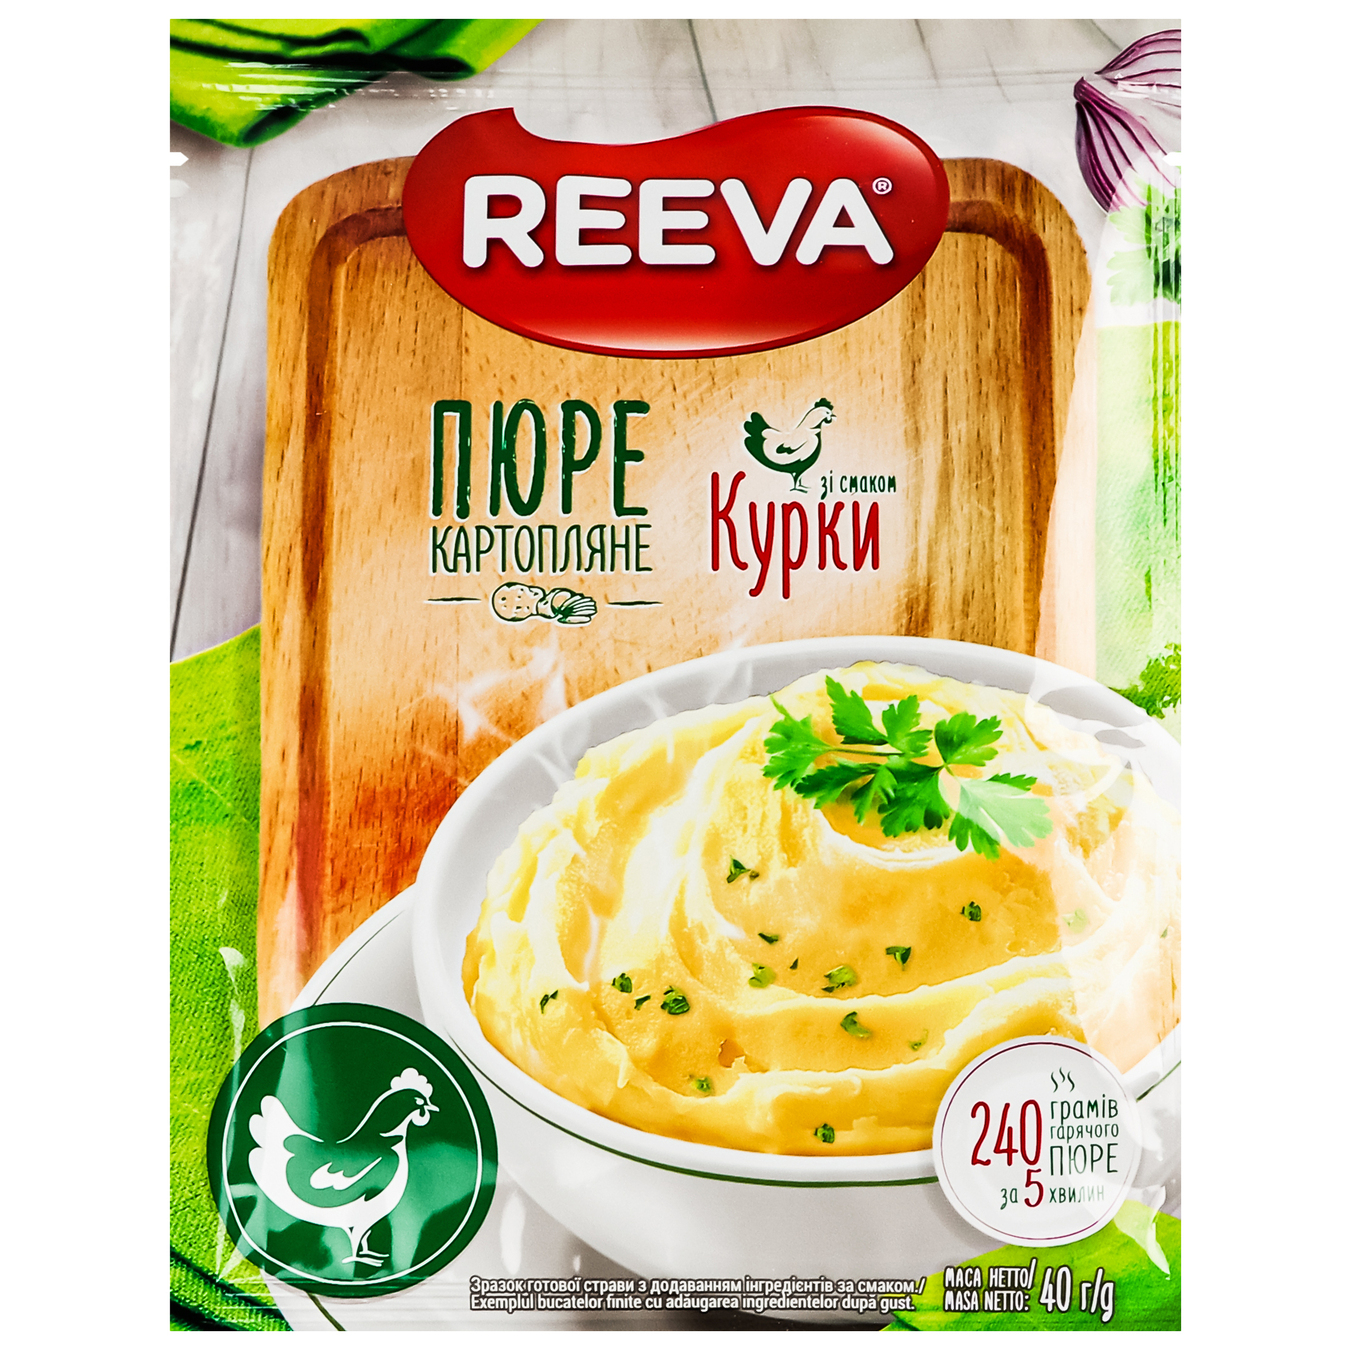 Reeva chicken-flavored mashed potatoes, pack of 40g